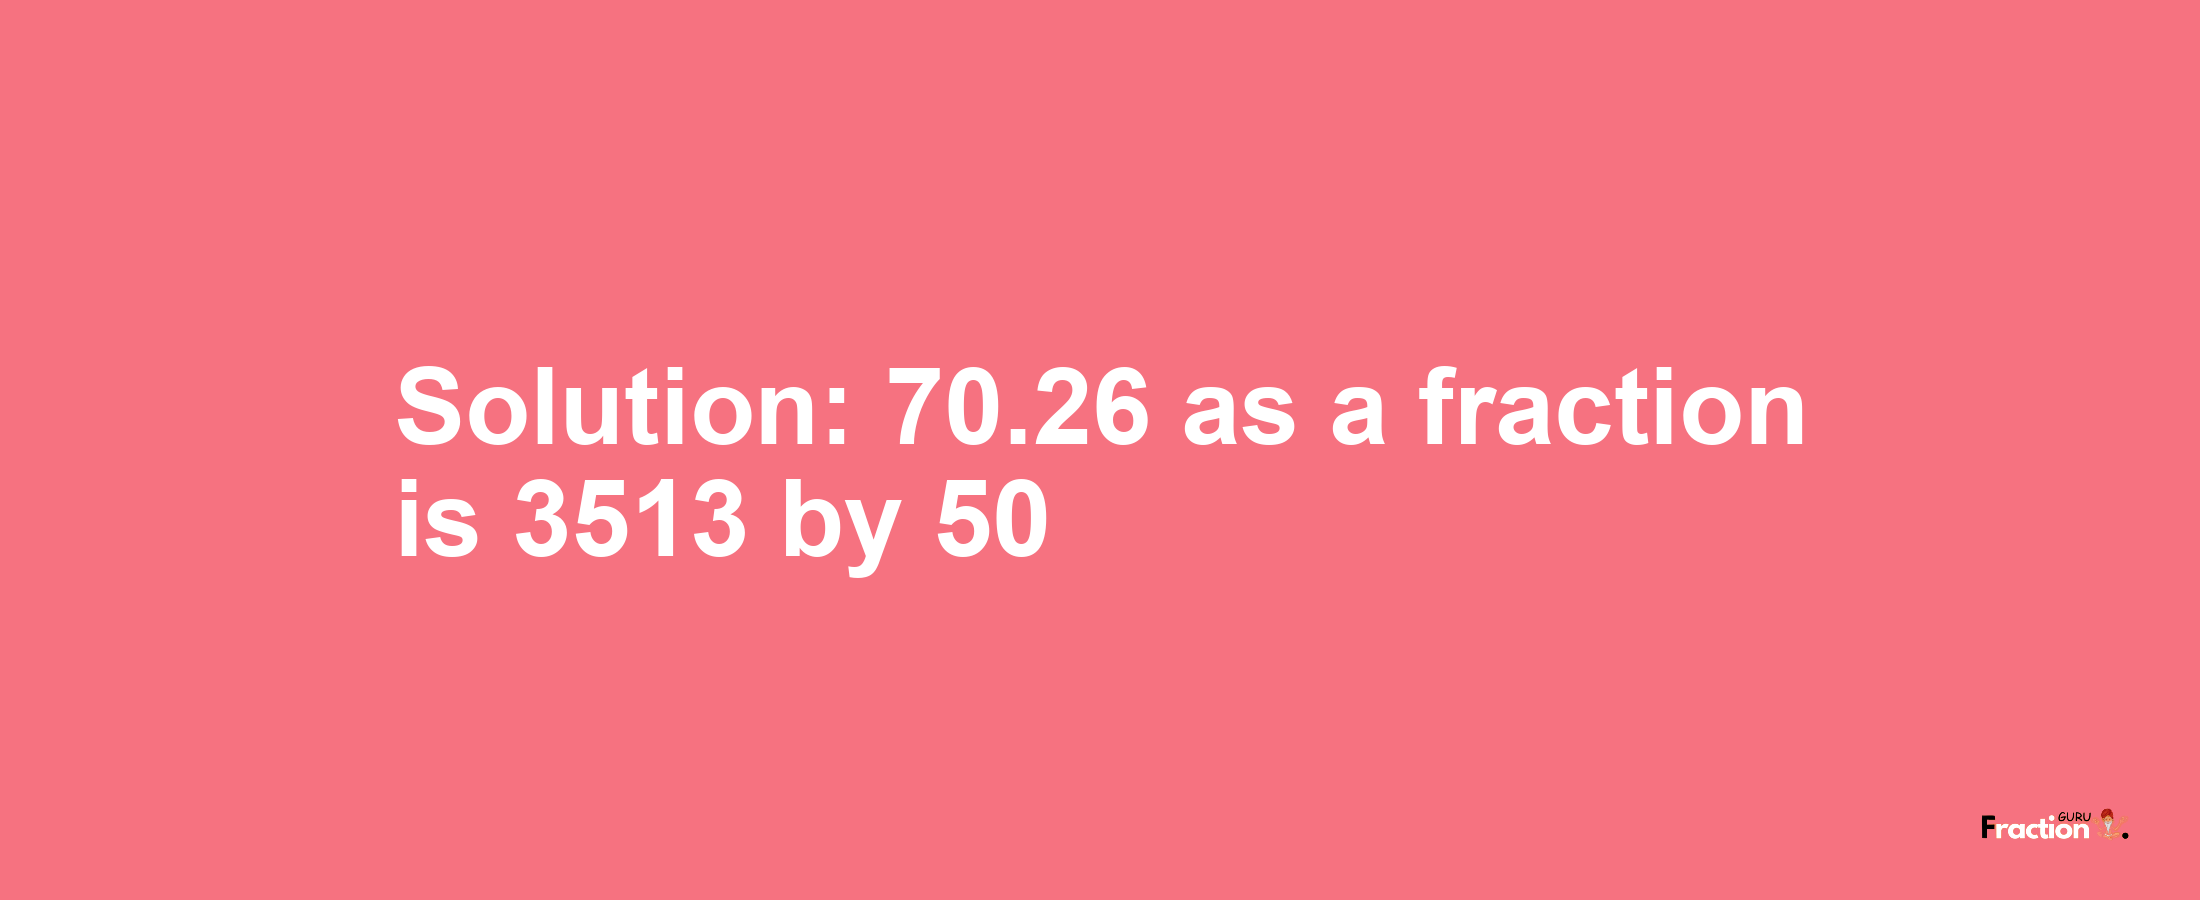 Solution:70.26 as a fraction is 3513/50